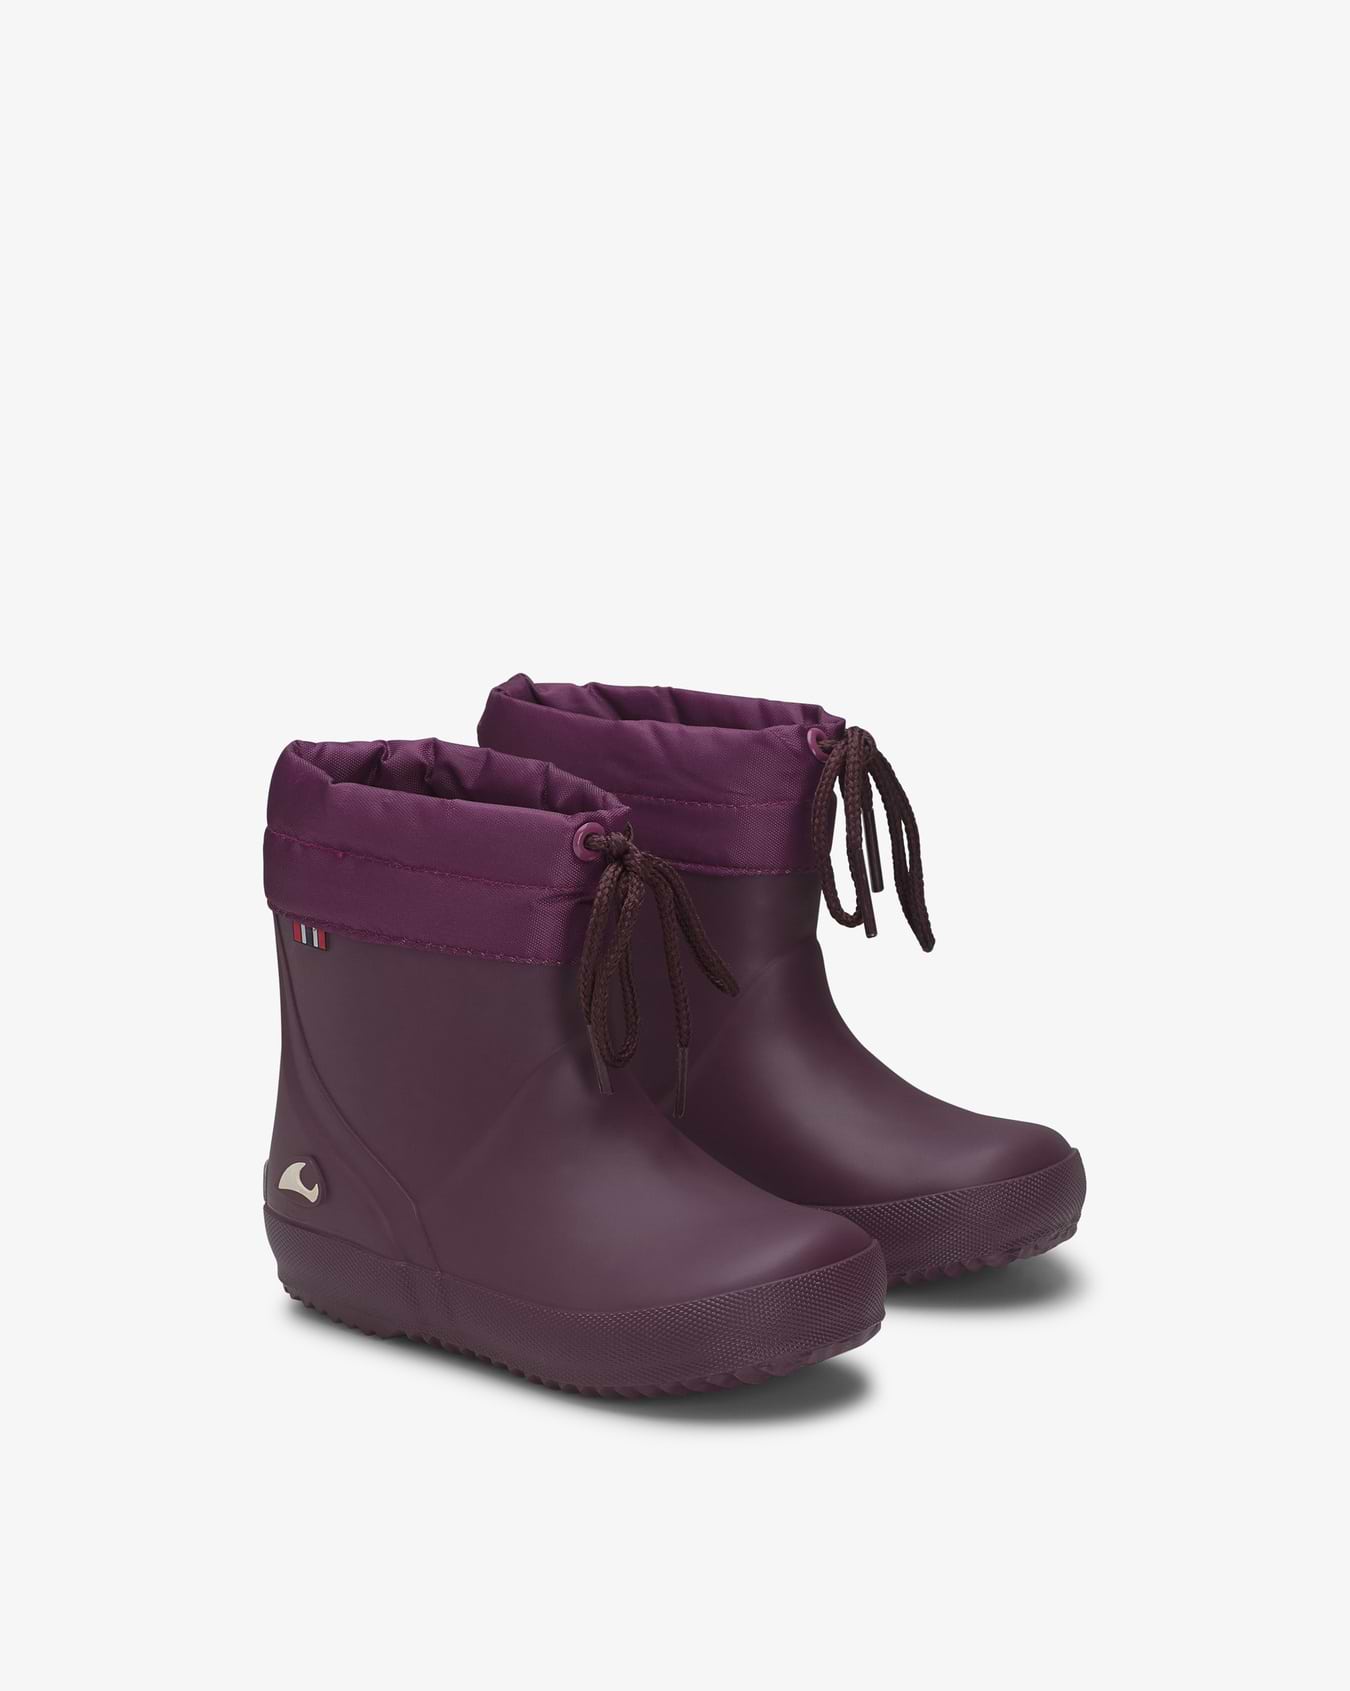 Viking Alv Indie Kids Rubber Boots Warmlined Purple